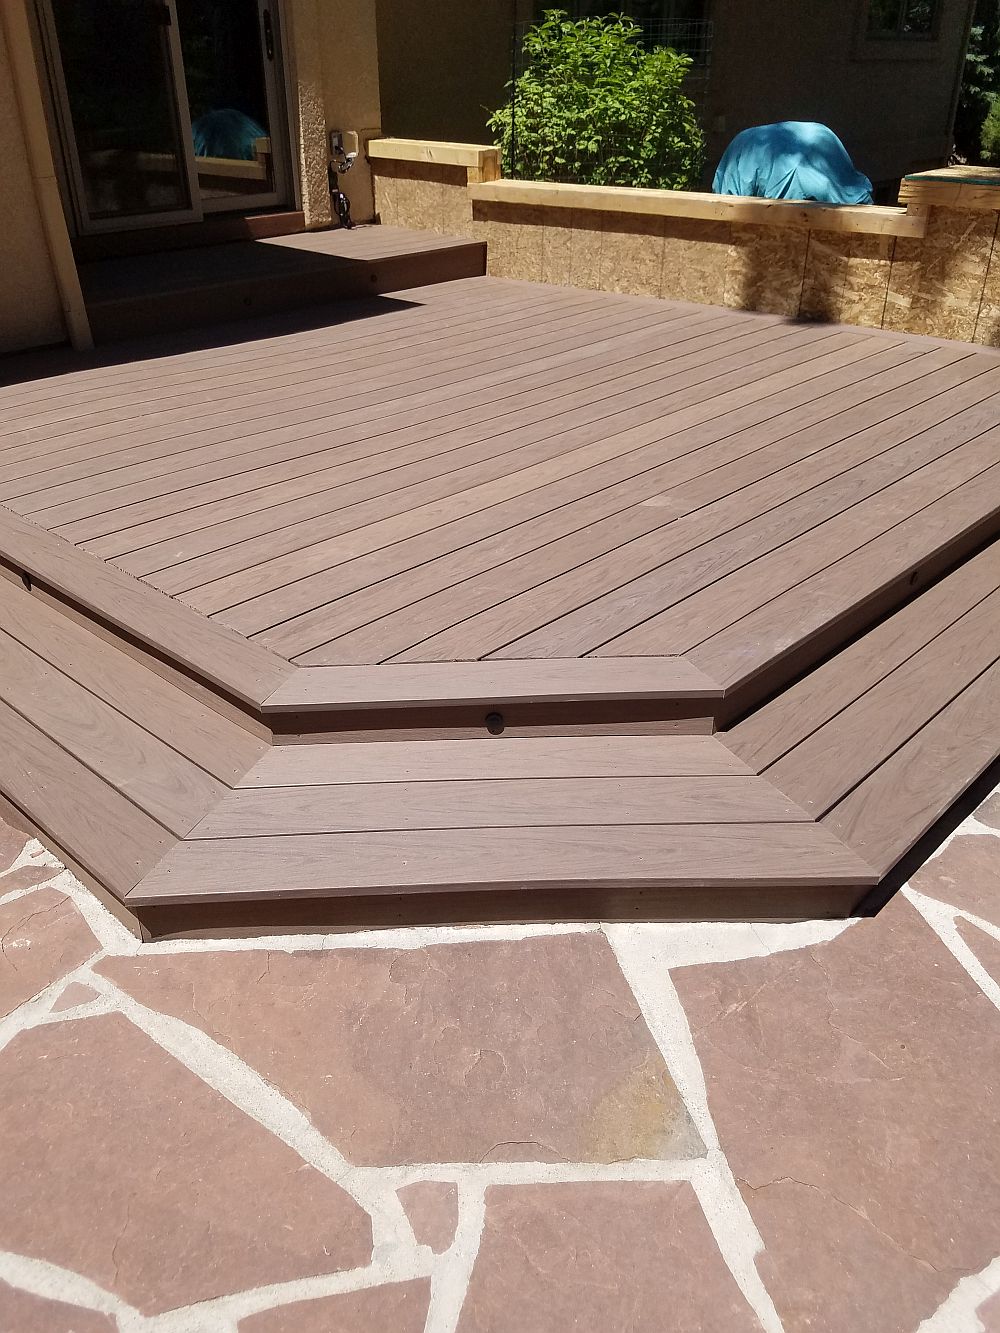 A ground level composite deck that features a single wrap around stair.